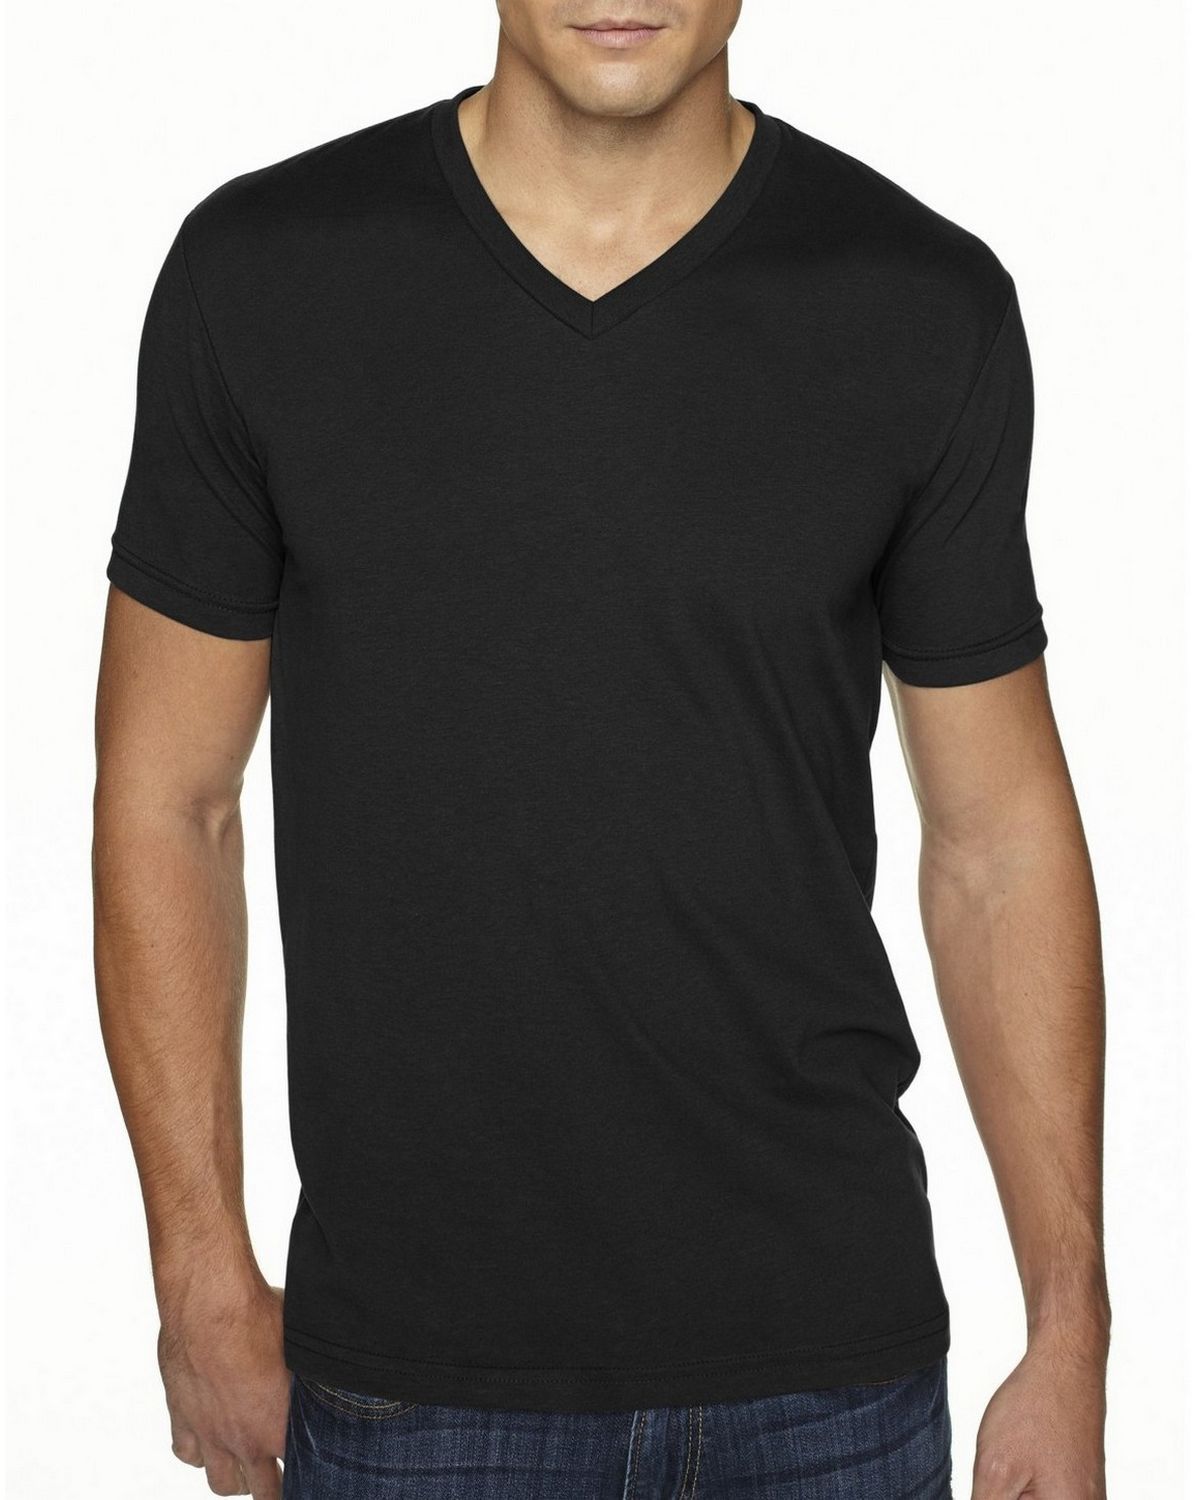 Next Level 6440 Mens Premium Fitted Sueded V-Neck Tee